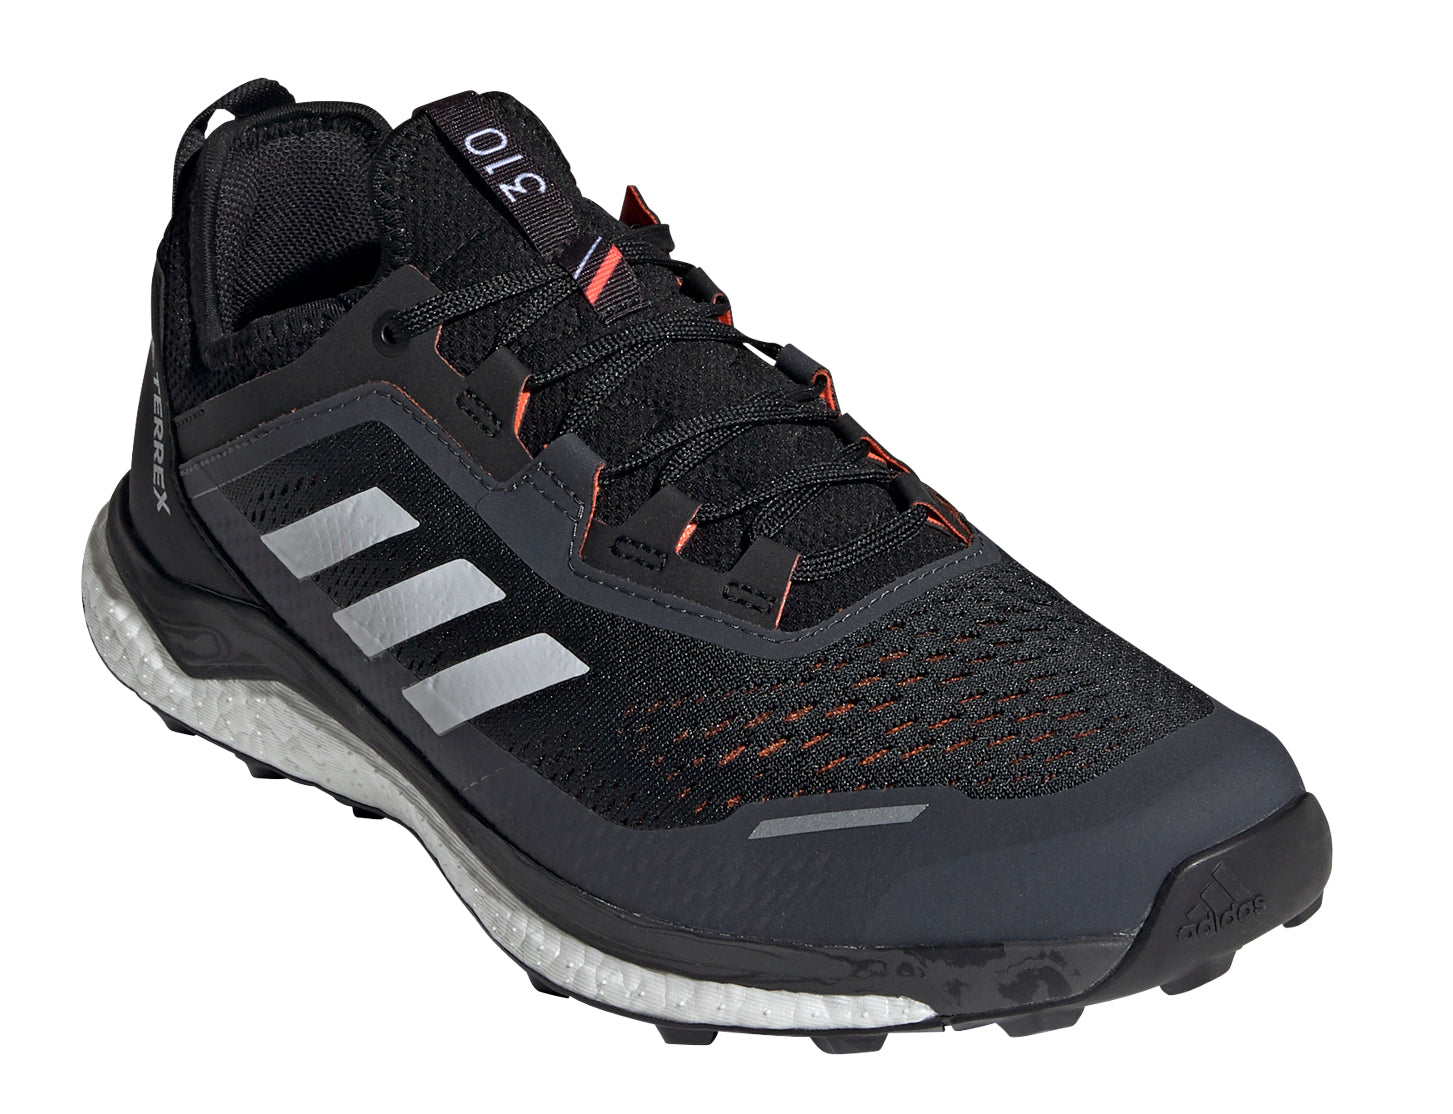 Men's adidas Terrex Agravic Flow Trail Running Shoe in Core Black/Crystal White/Solar Red from the front